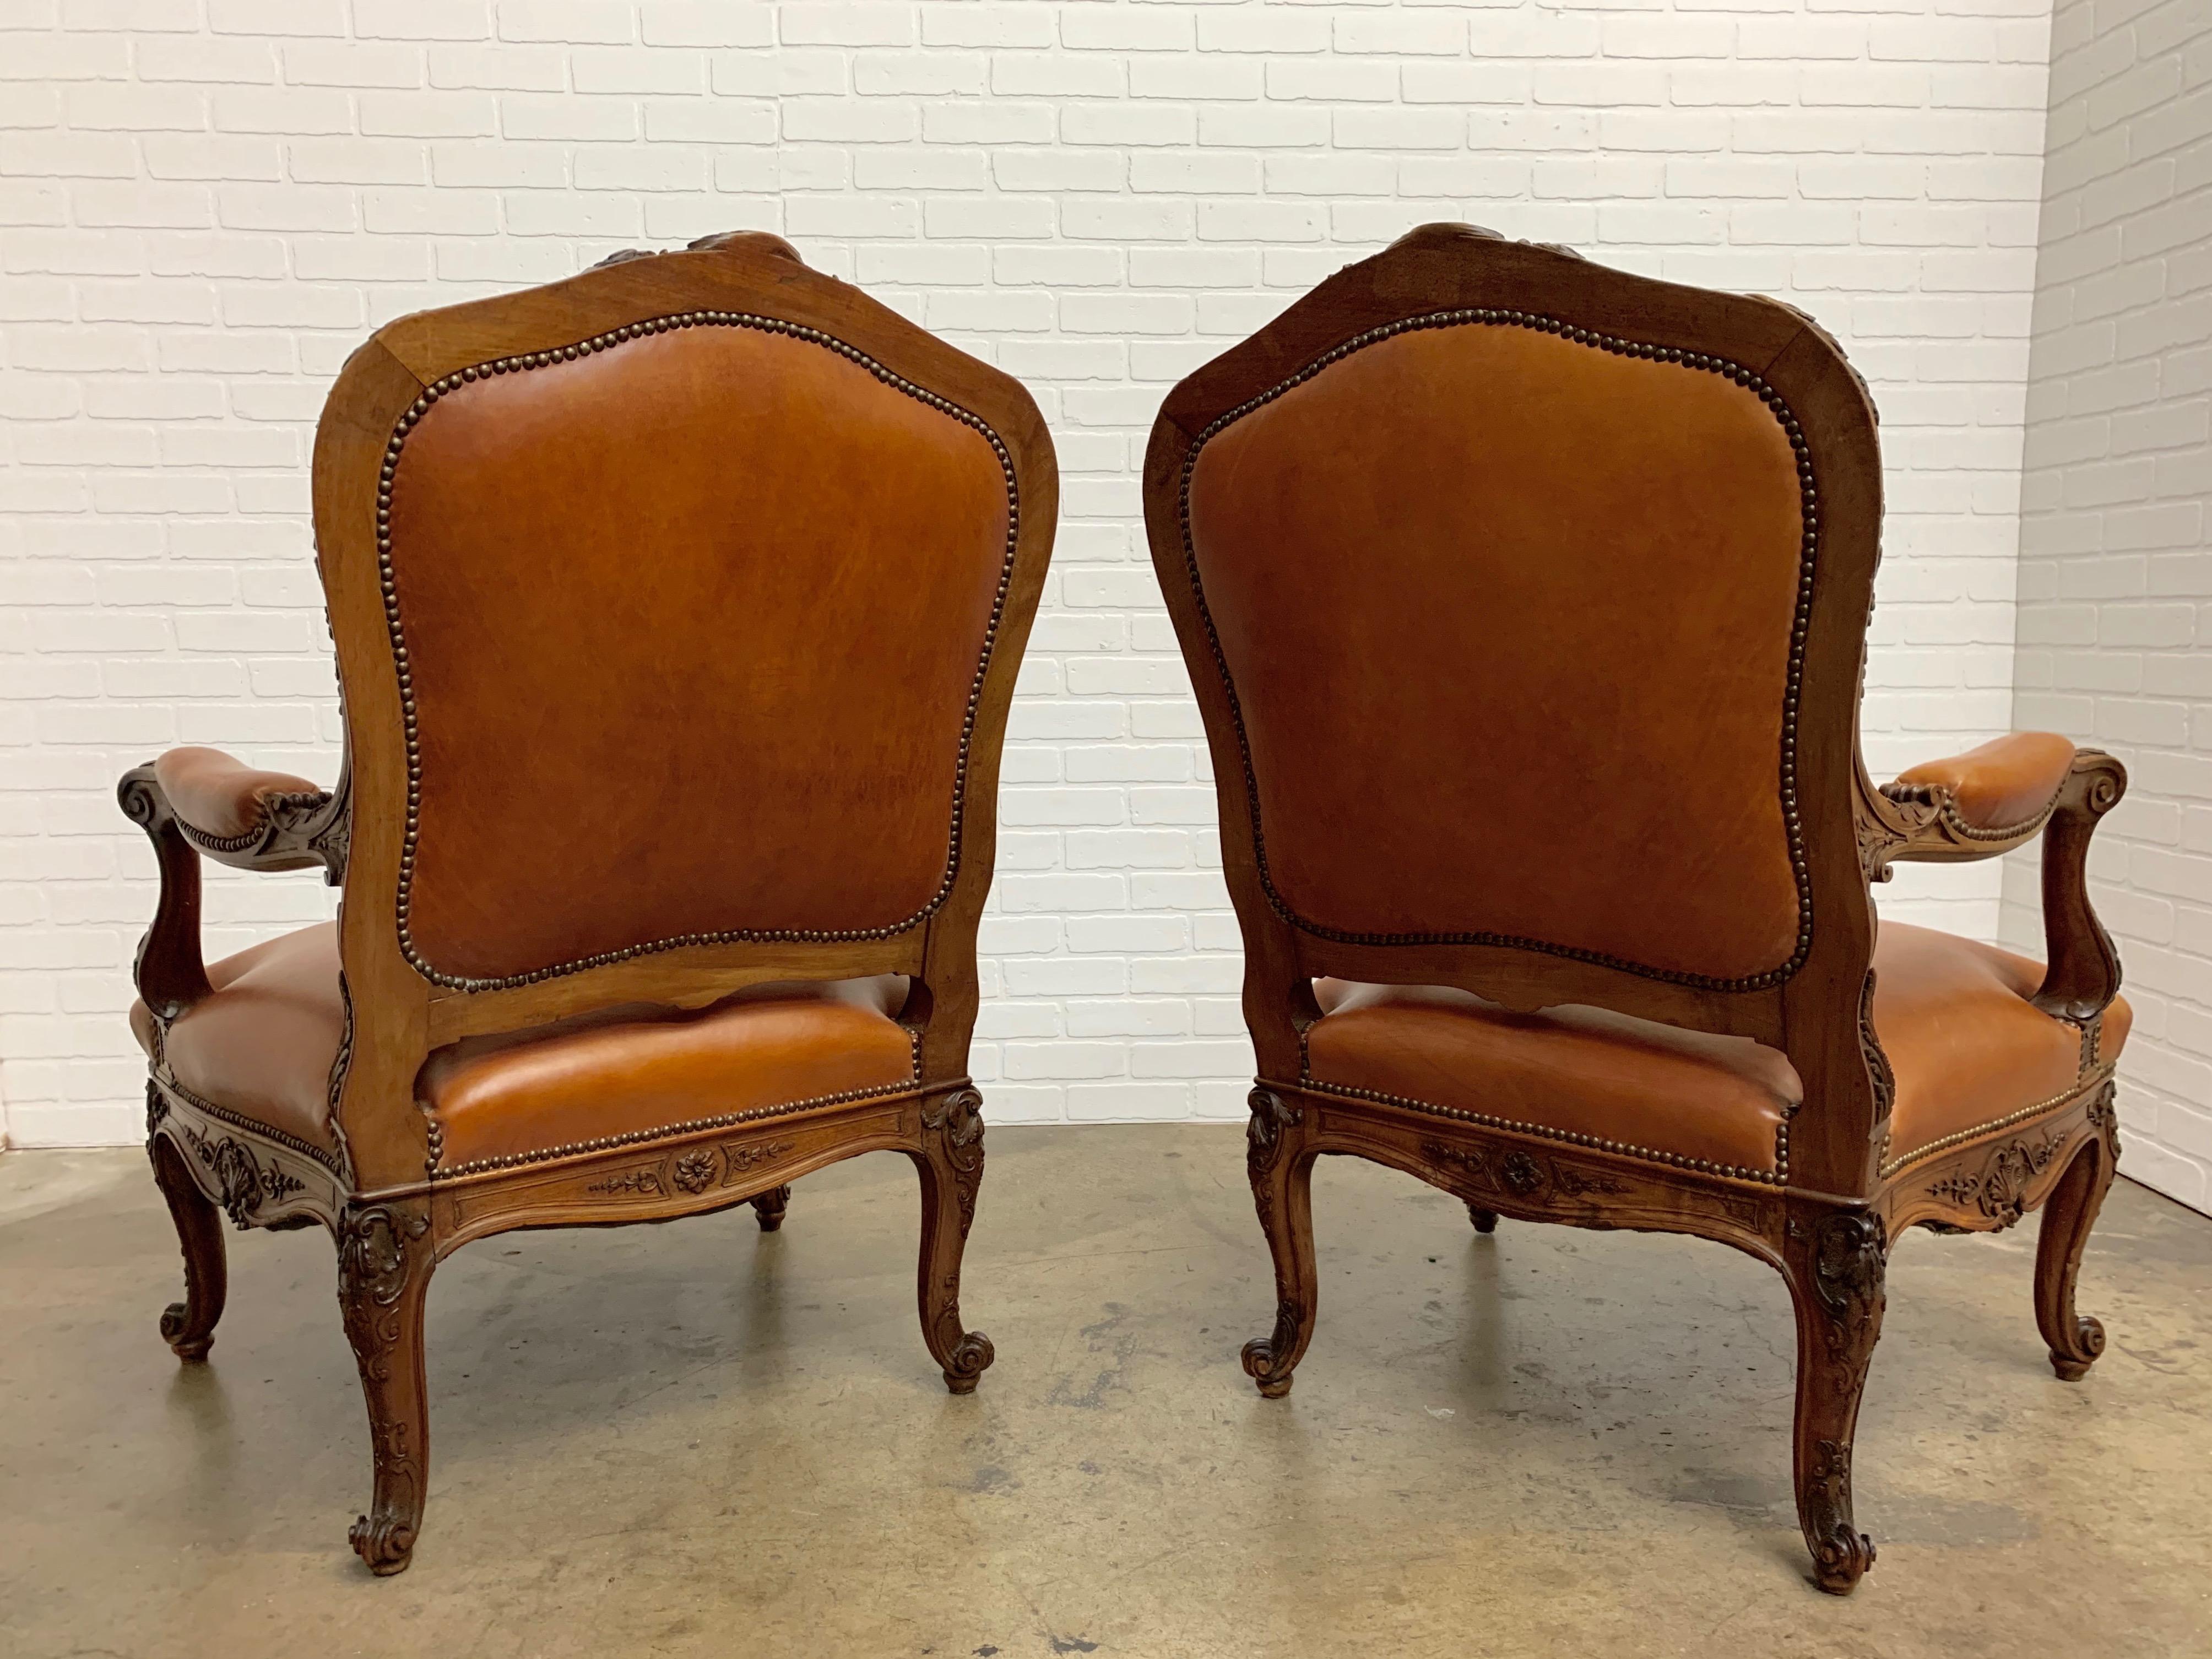 19th Century Oversized French Louis XV Style Armchairs with Leather Upholstery